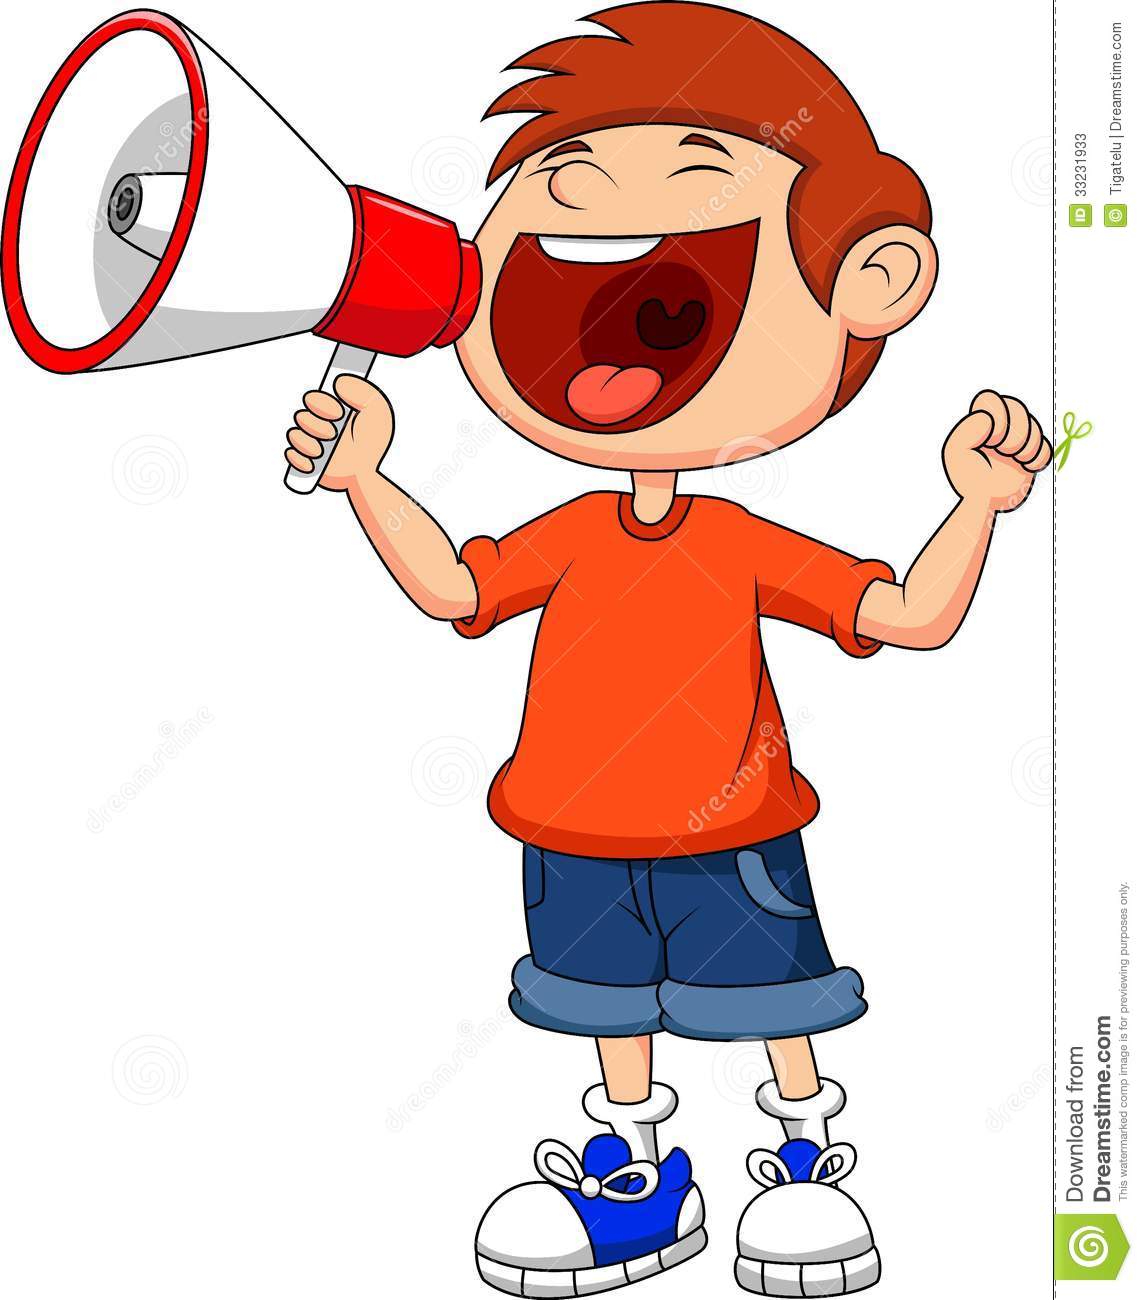 Cartoon Boy Yelling And Shouting Into A Megaphone Stock Photos   Image